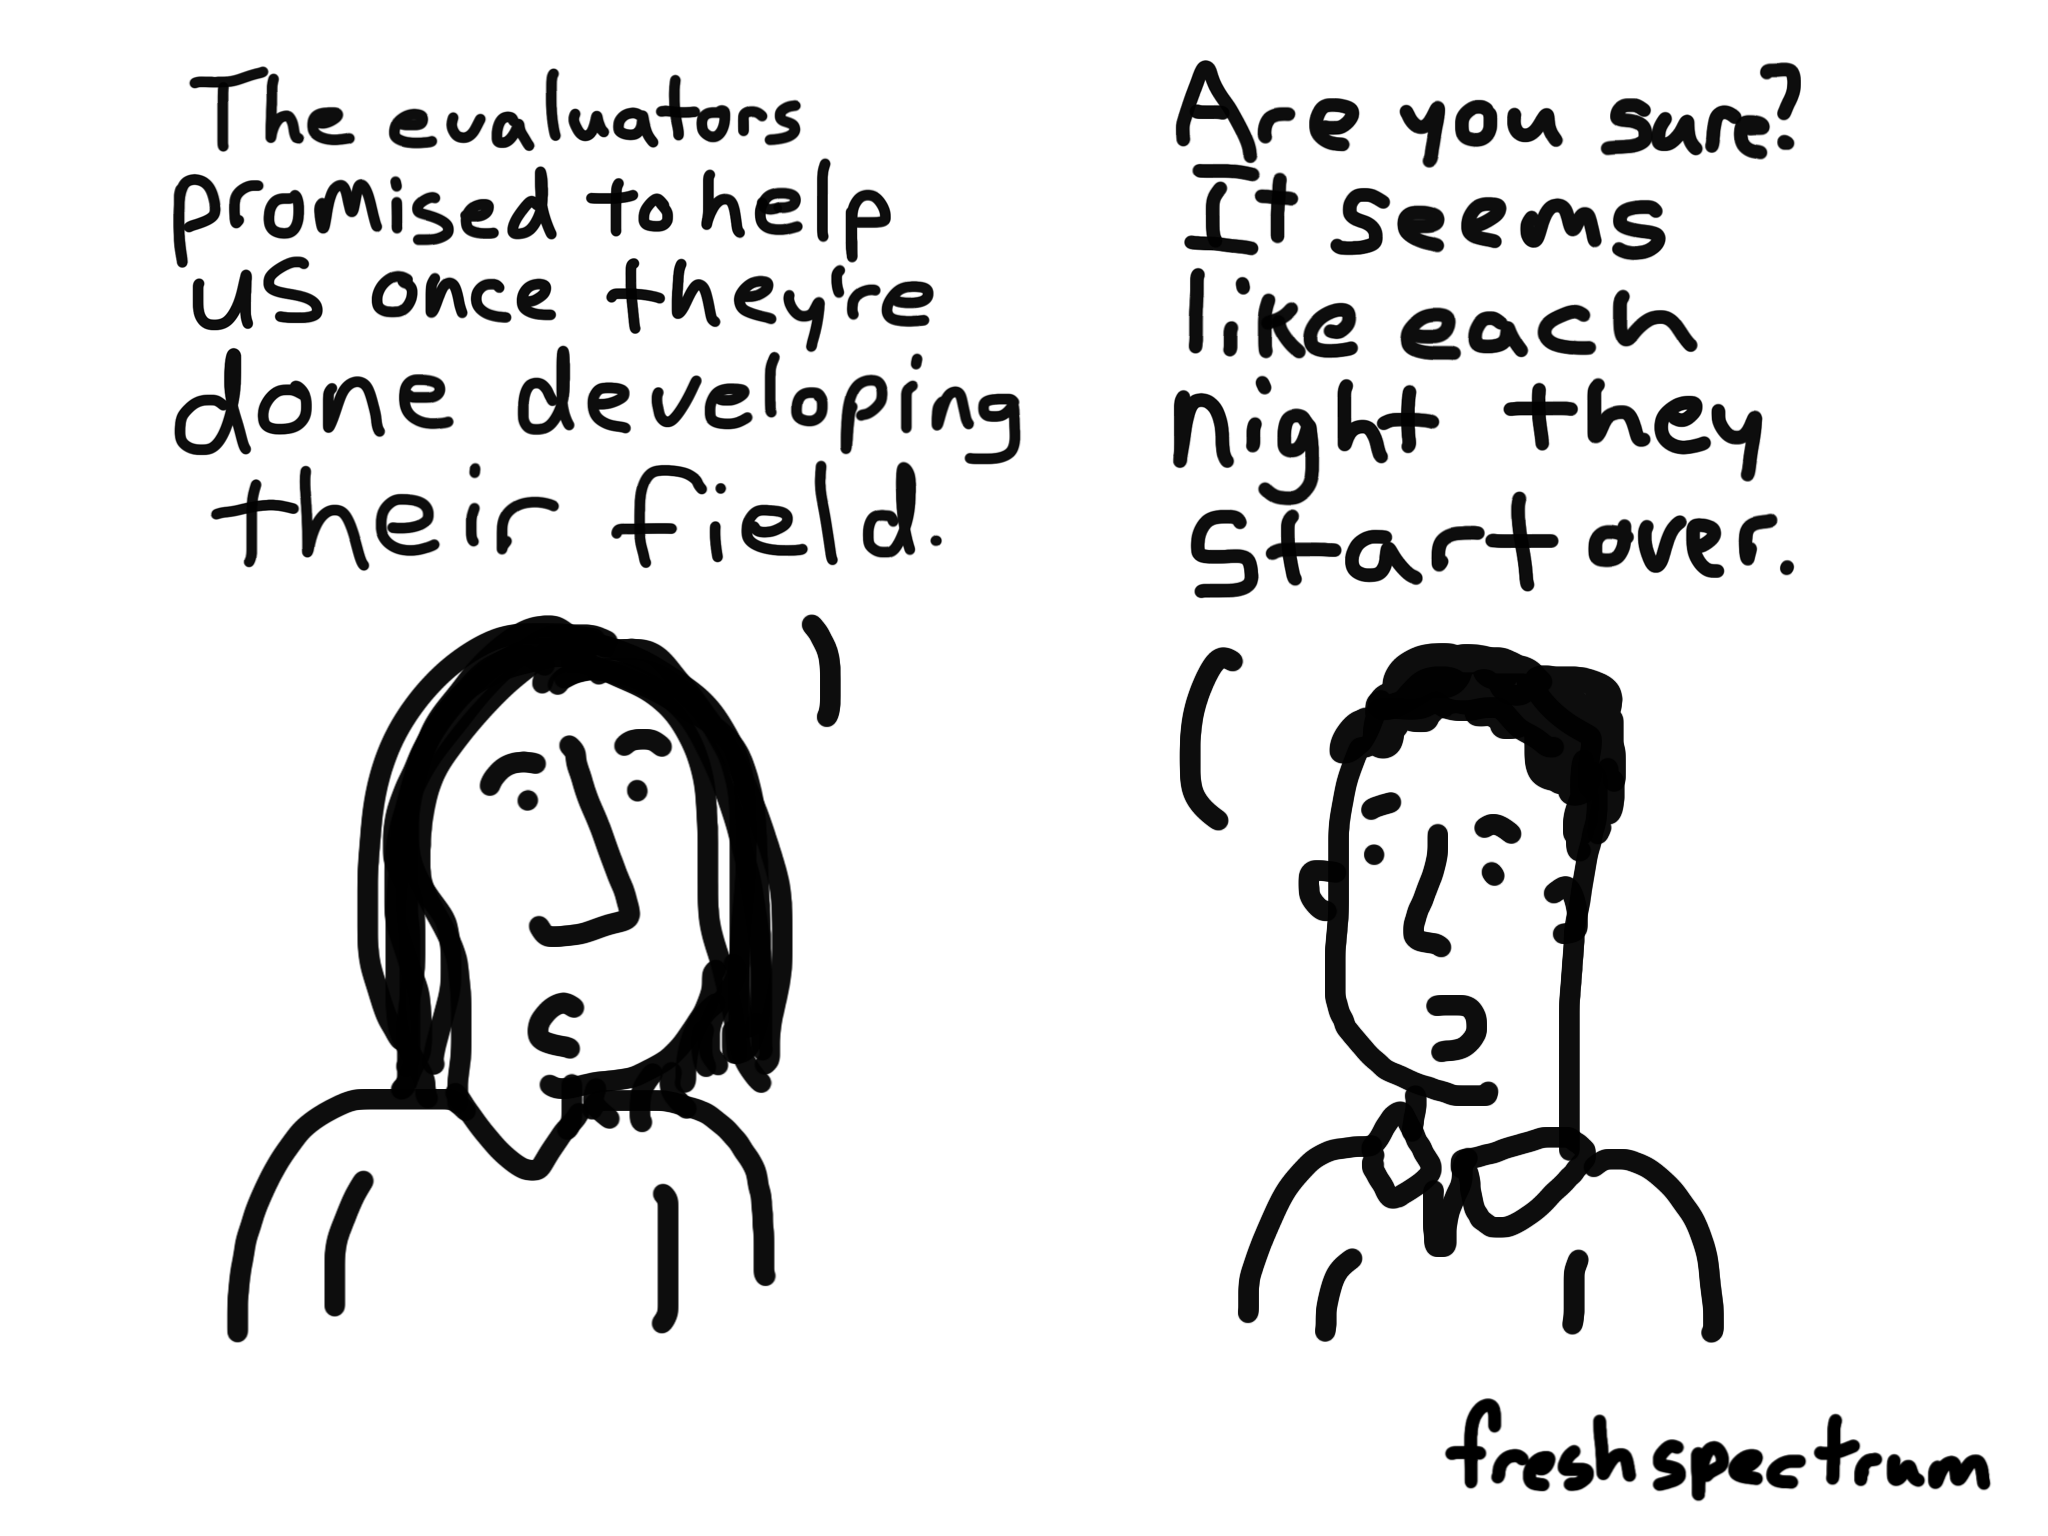 Cartoon. The evaluators promised to help us once they're done developing their field. Are you sure?  It seems like each night they start over.